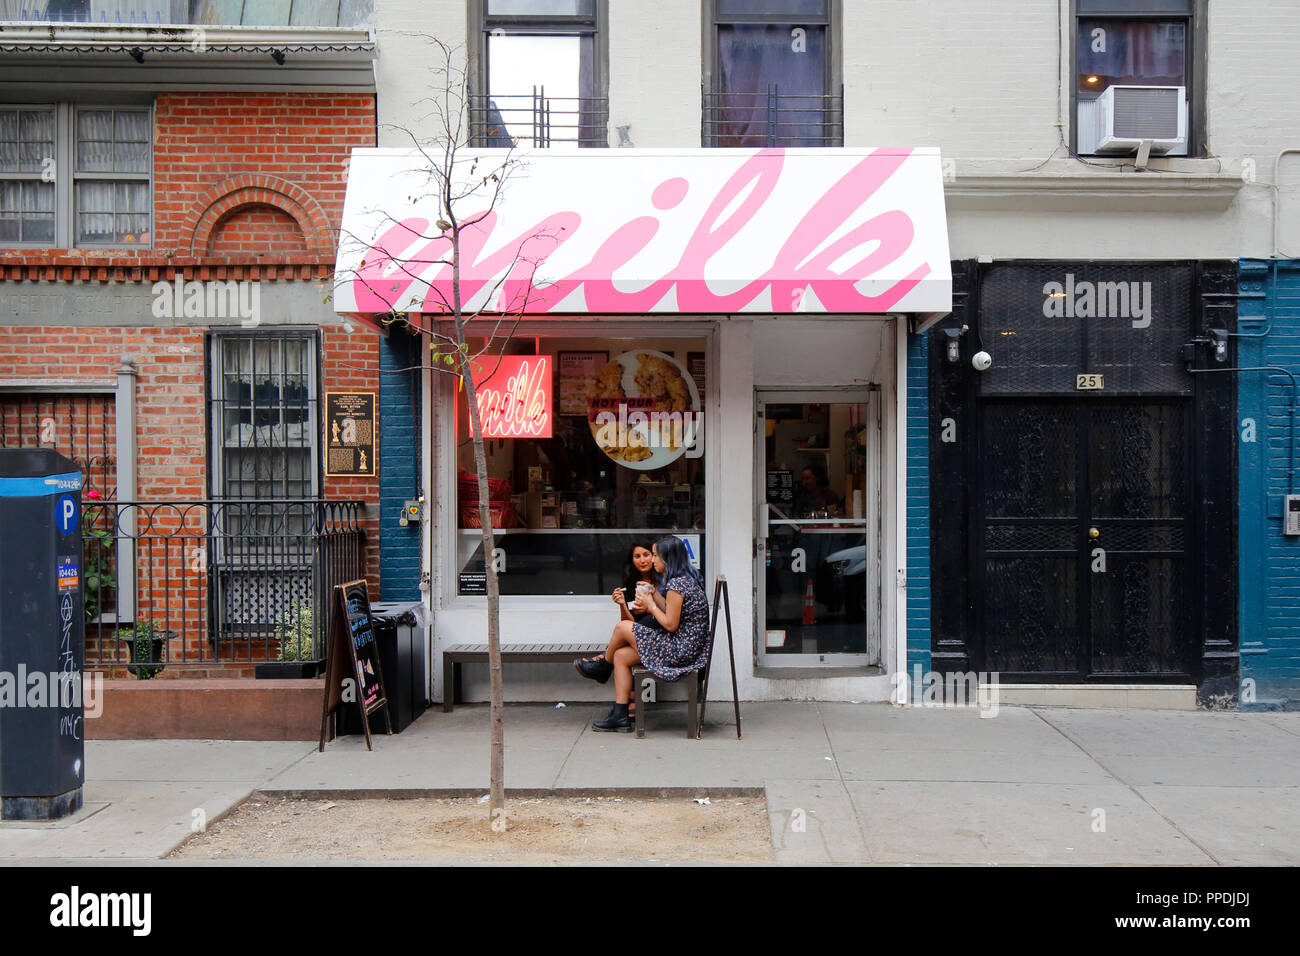 Milk Bar East Village, 251 E 13th St, New York, NY. exterior of a bakery in the East Village neighborhood of Manhattan. Stock Photo